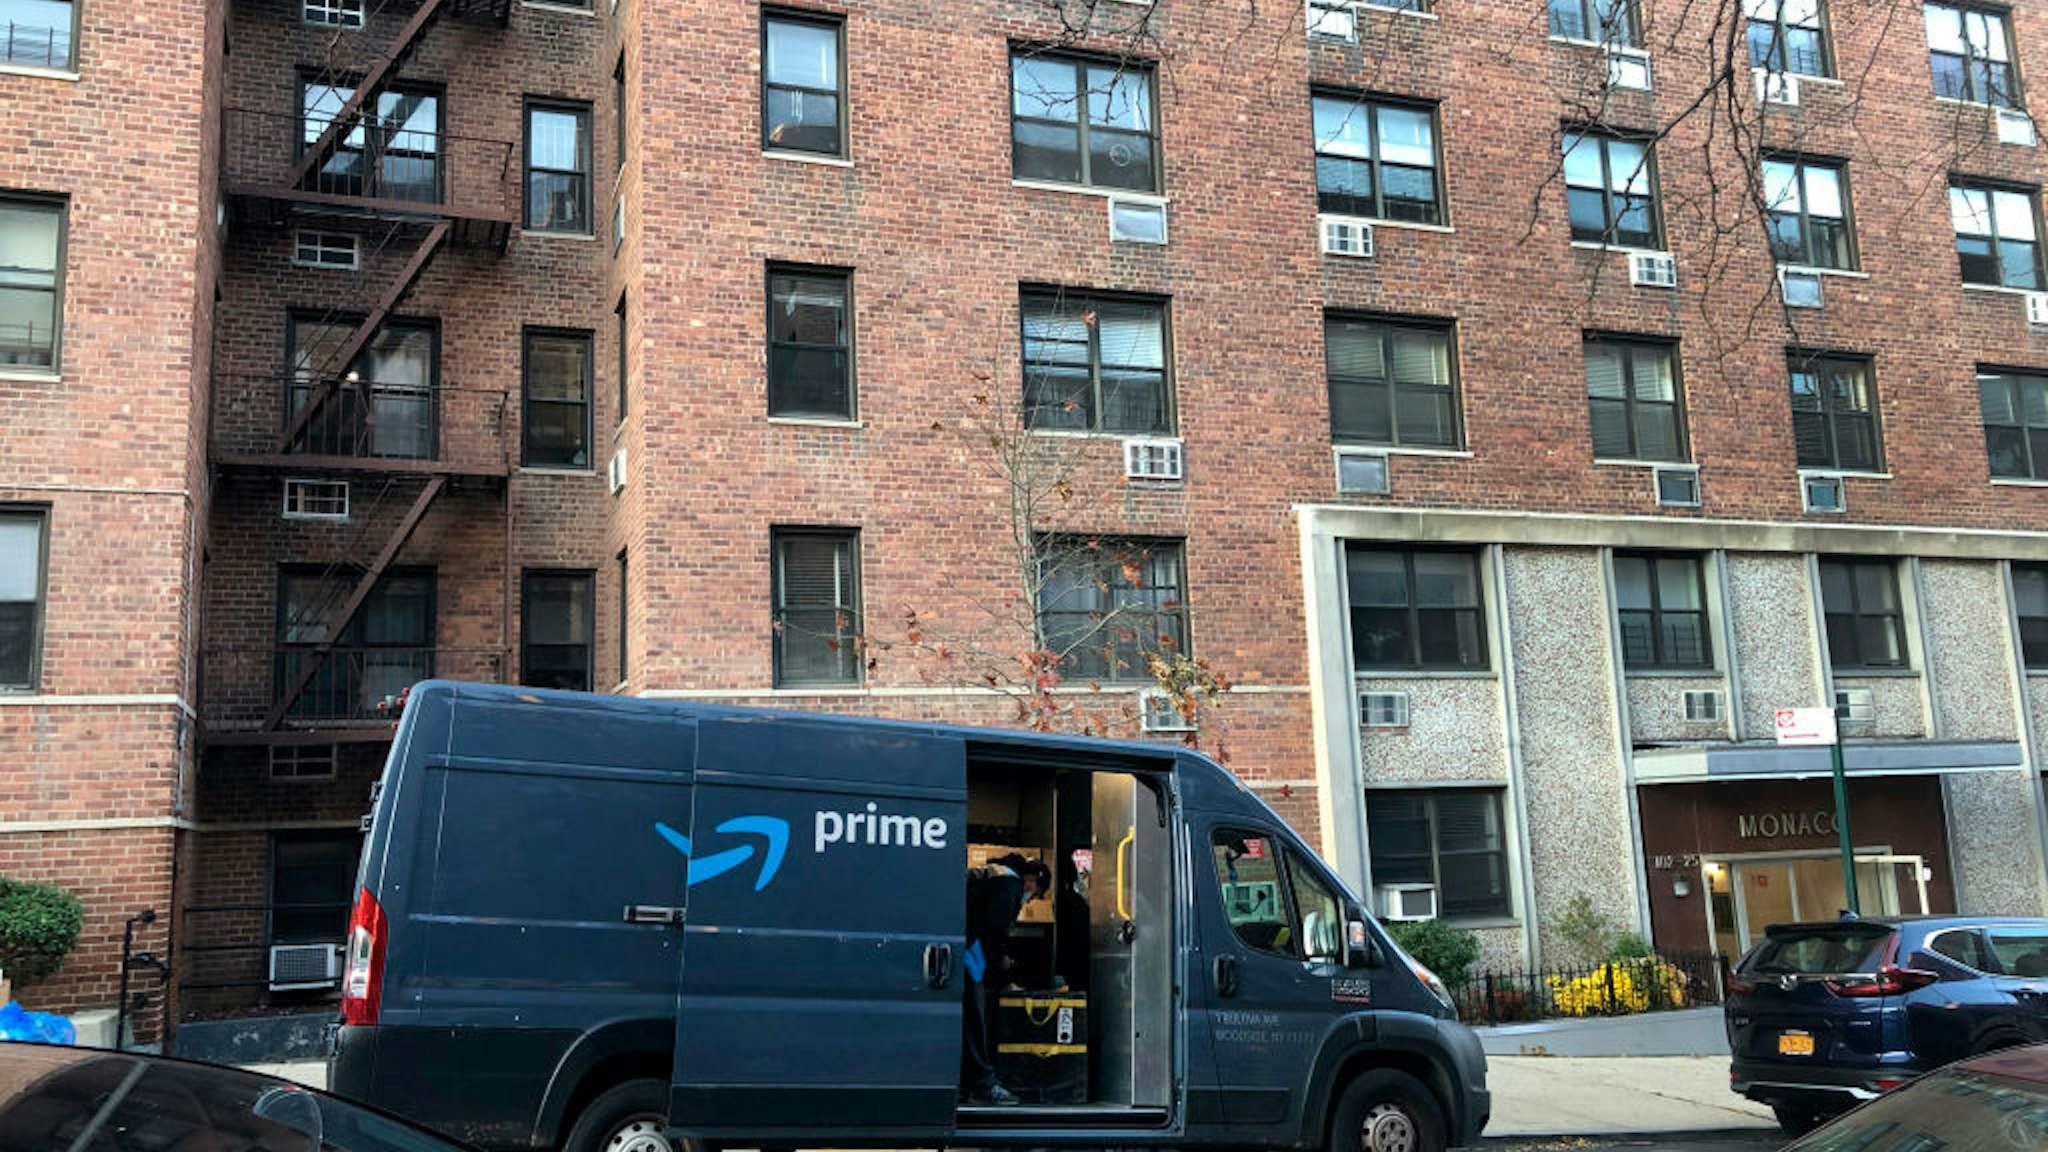 Amazon Prime delivery van parked outside apartment building, Forest Hills, Queens, NY.